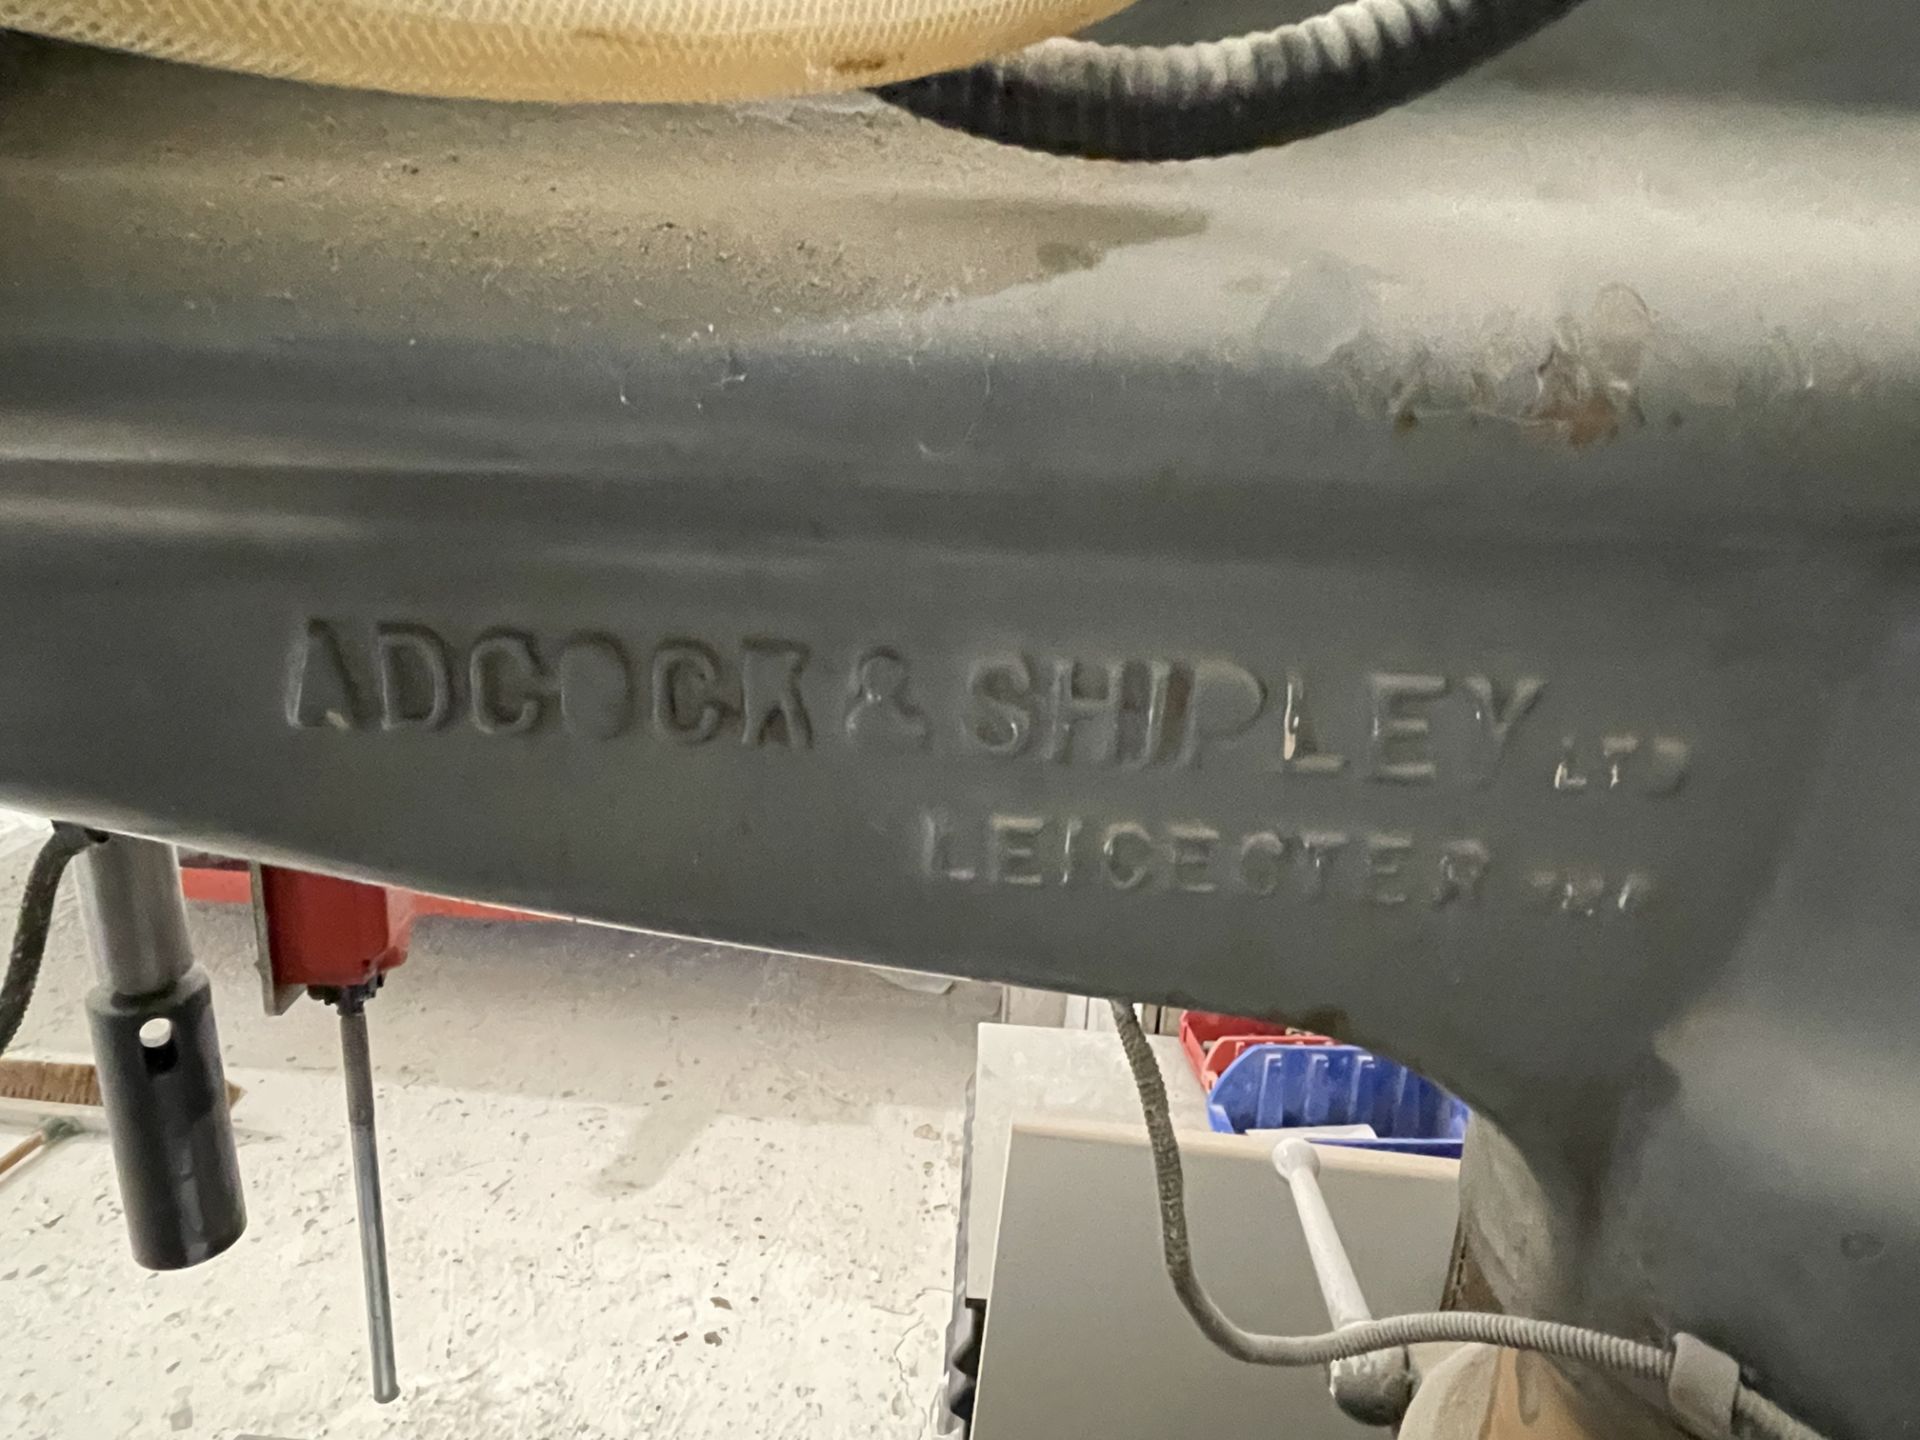 1963 Adcock & Shipley Radial Drill S/No. 3575D/140SV, 3-Phase with Machine Vice - Image 5 of 7